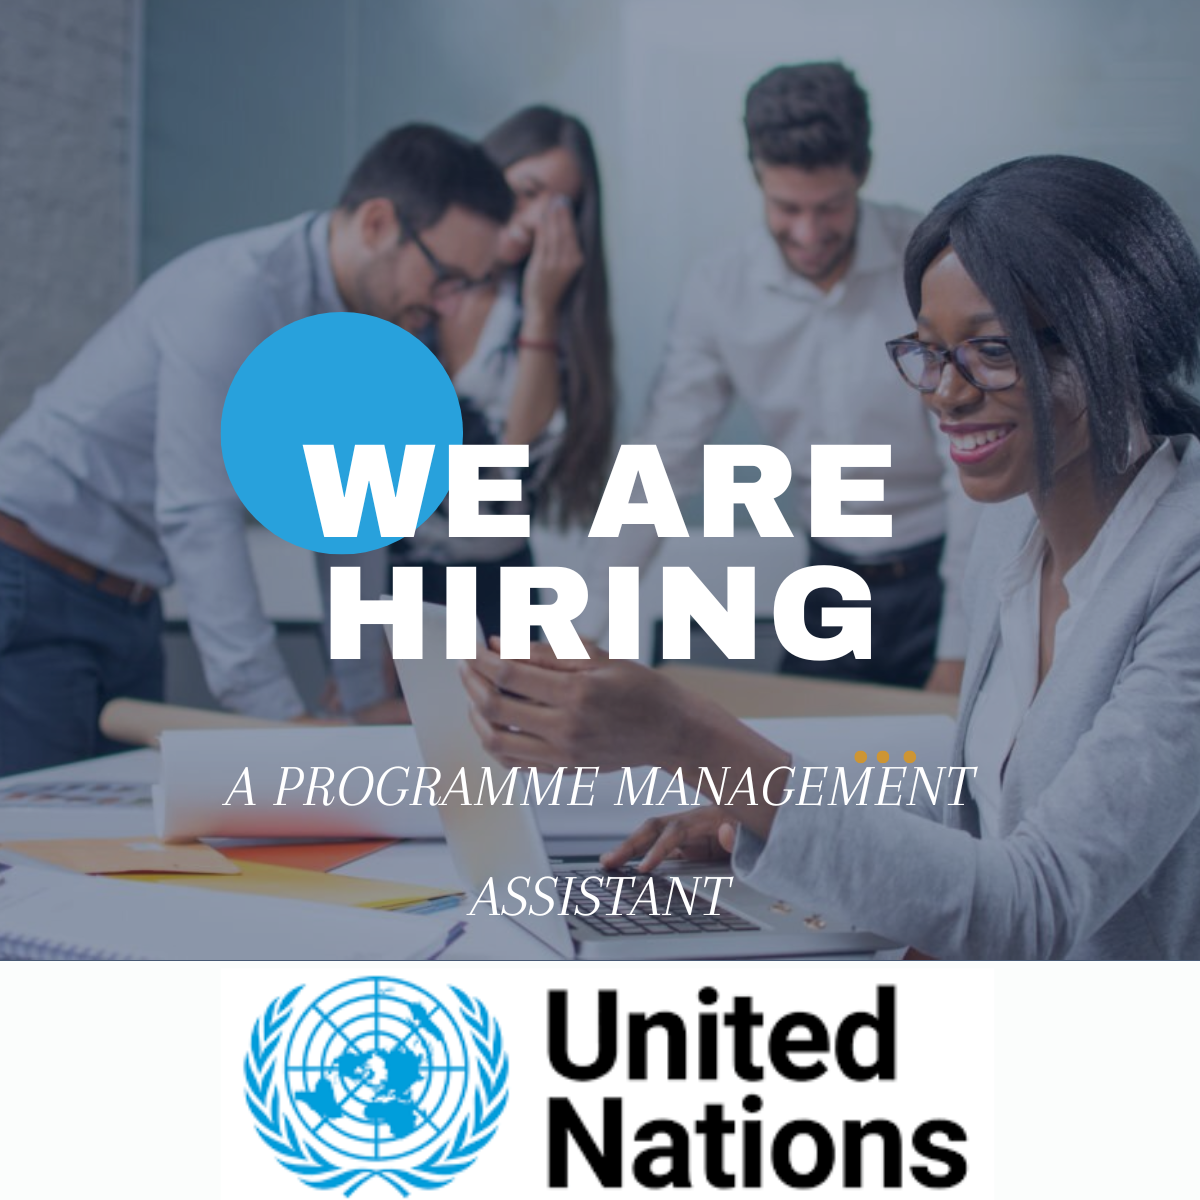 Join the United Nations team as a Programme Management Assistant. Apply today!